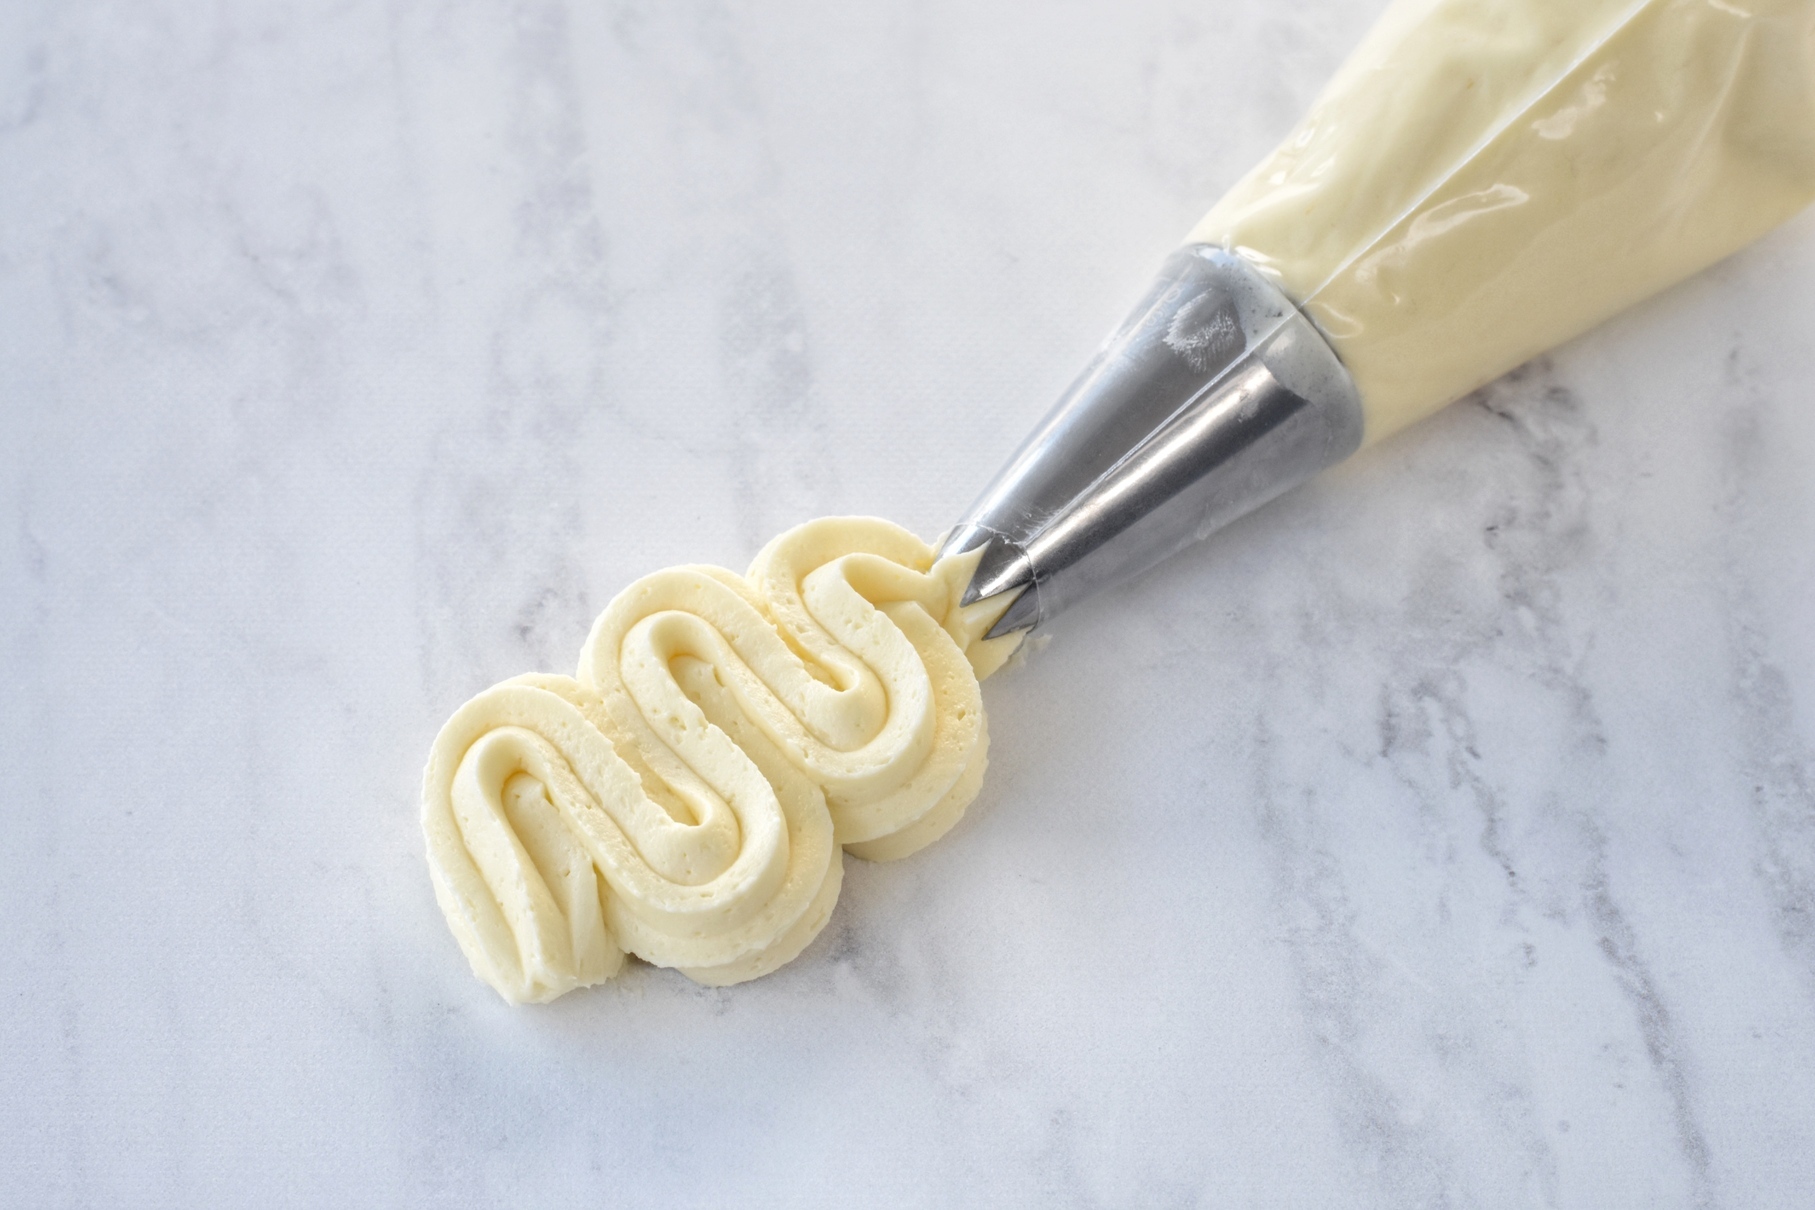 Buttercream being piped onto marble.